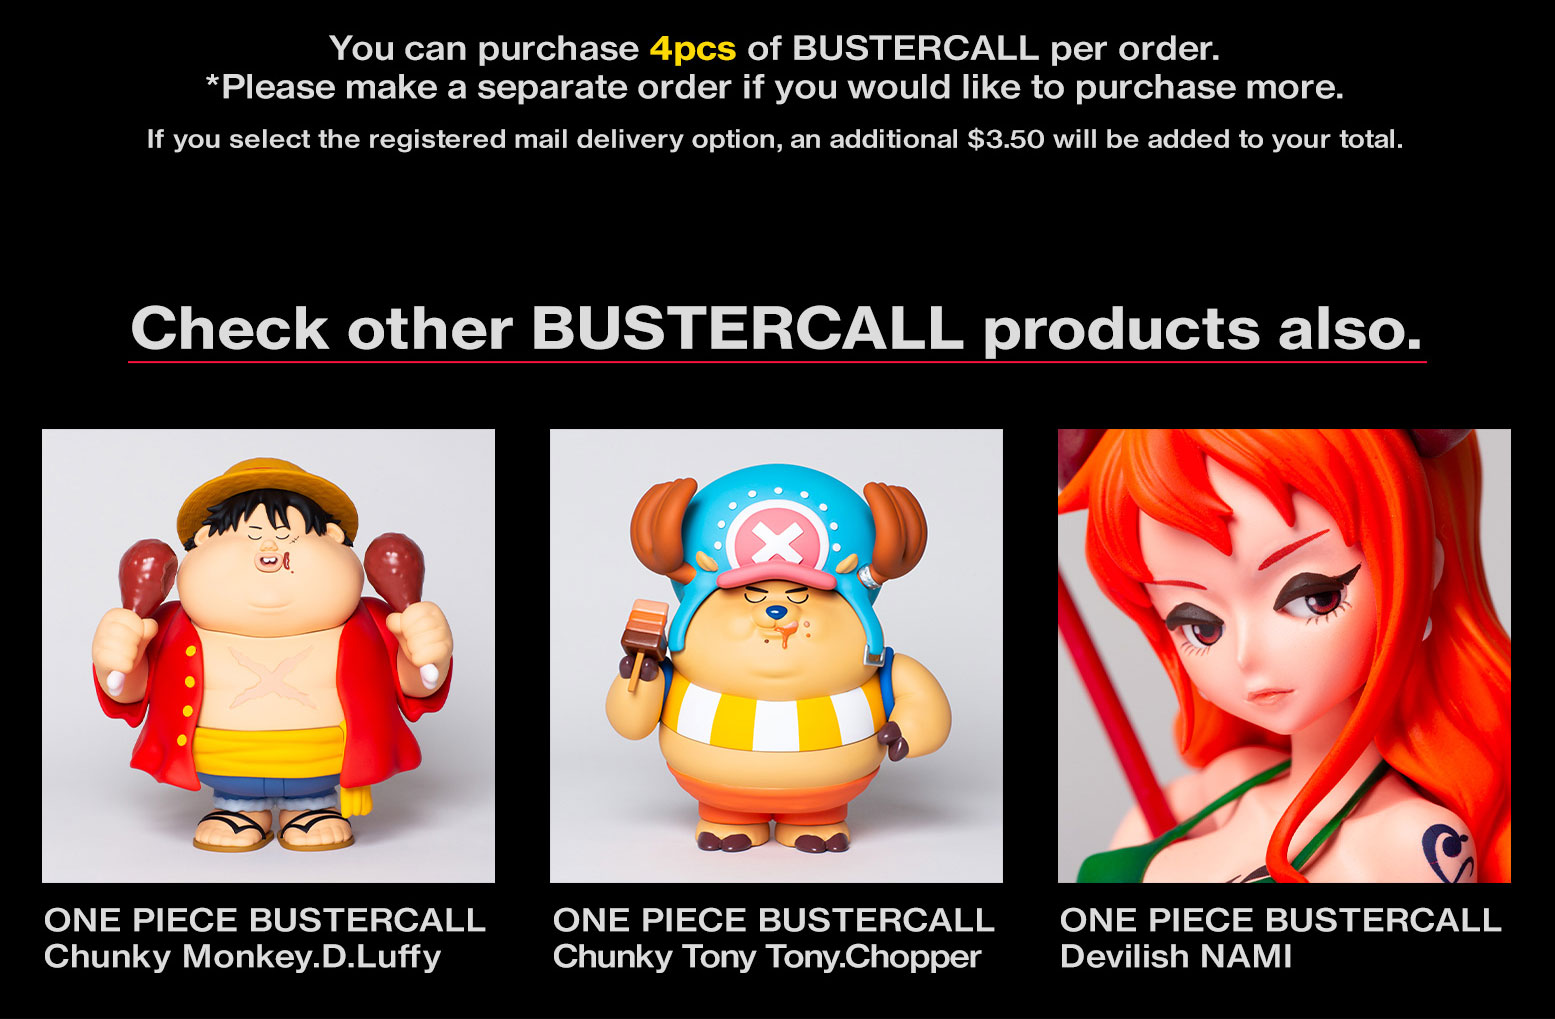 ONE PIECE BUSTERCALL Chunky Monkey.D.Luffy | BUSTERCALL | PREMIUM 